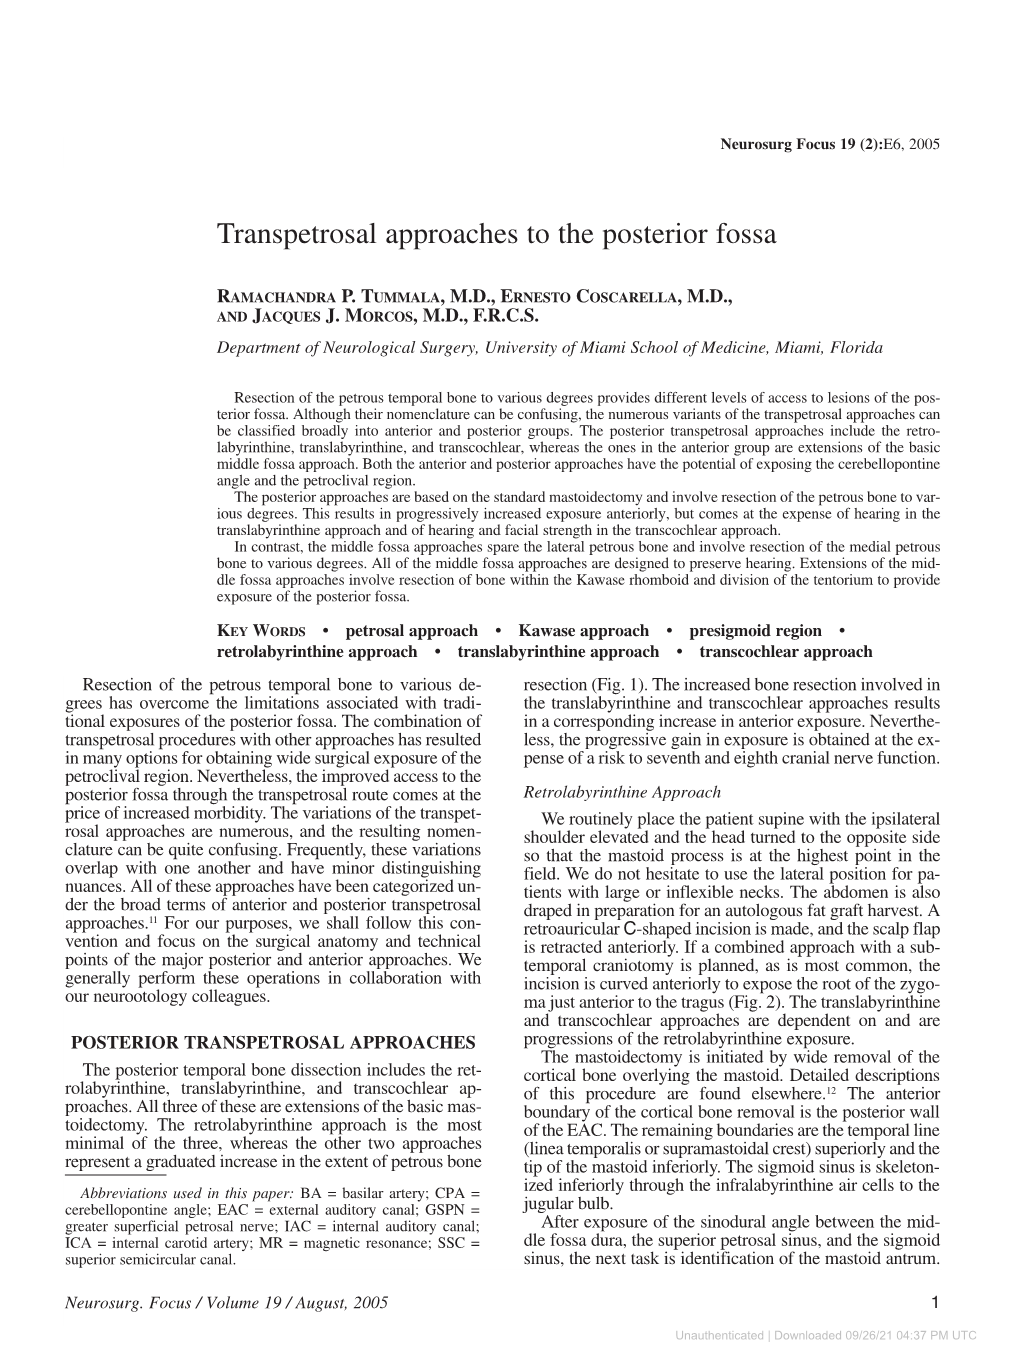 Transpetrosal Approaches to the Posterior Fossa